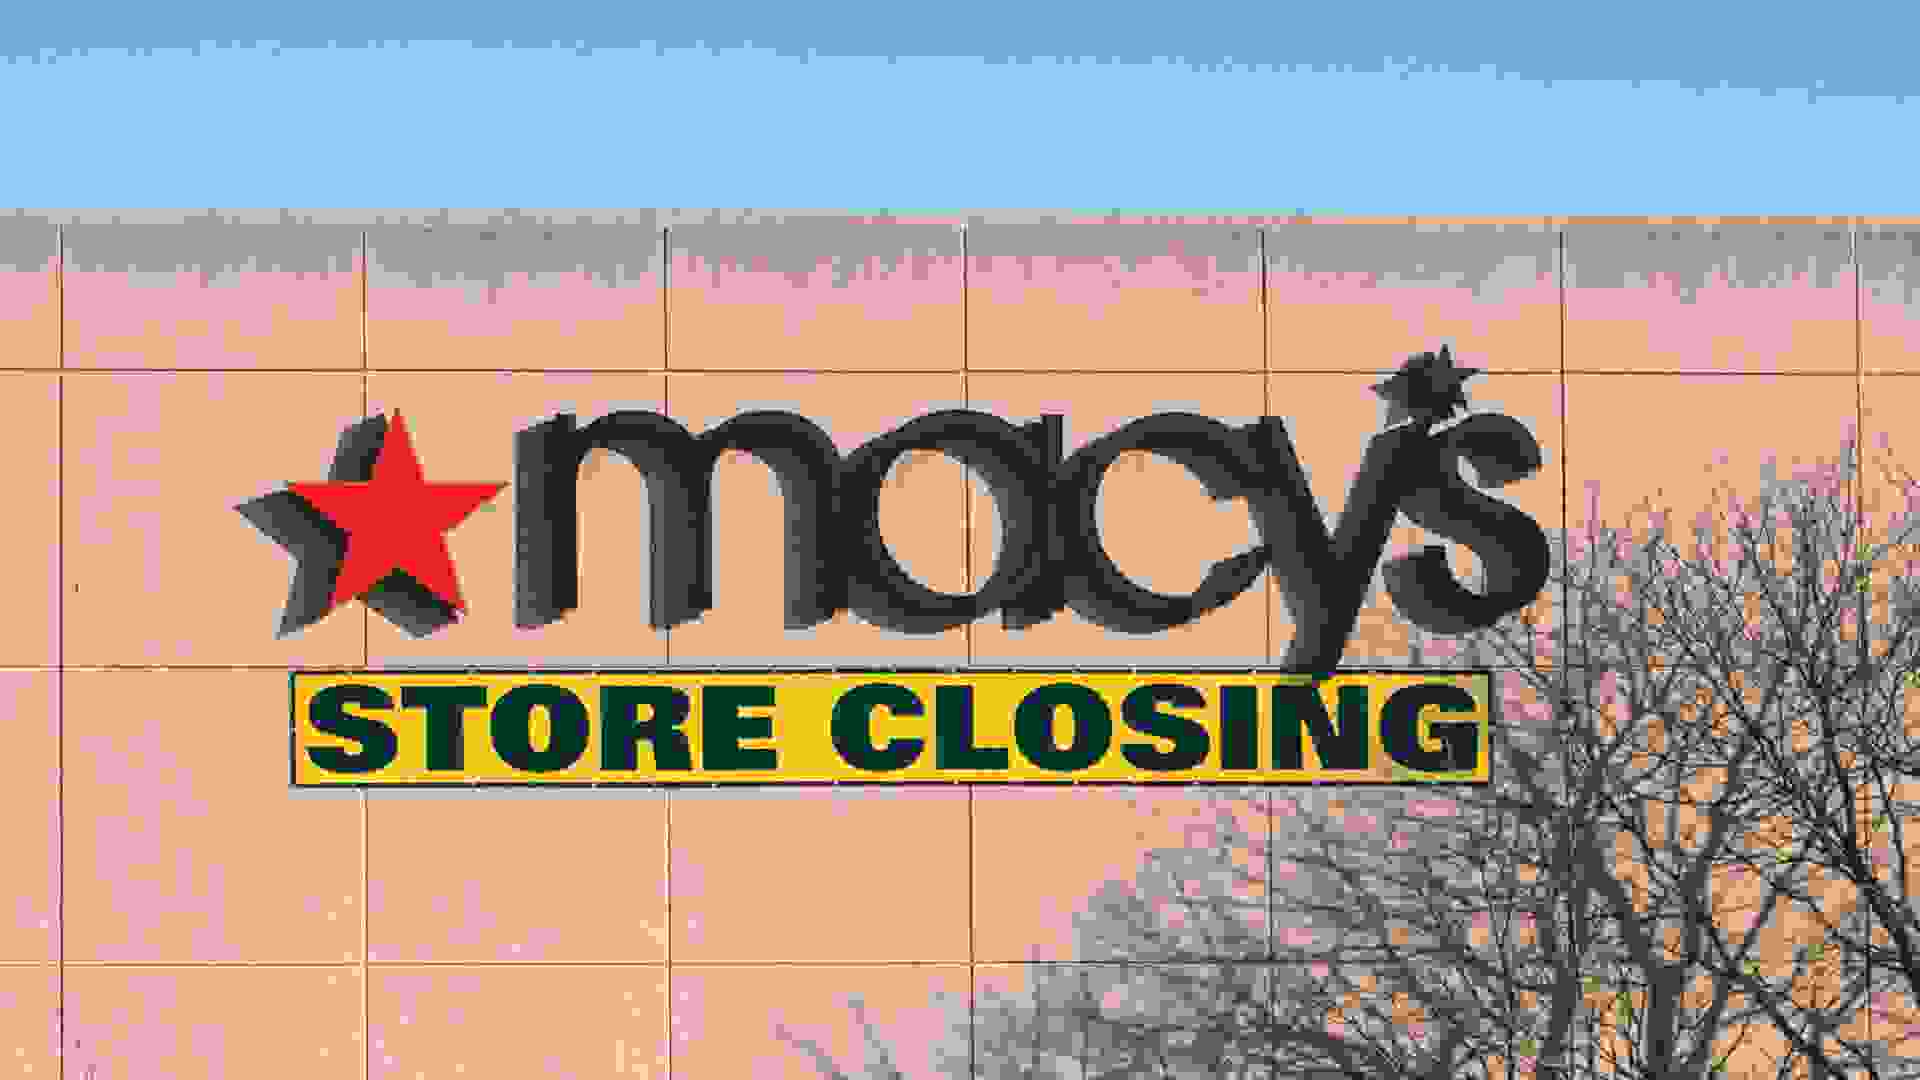 West Dundee, IL / USA - 02/22/20: Macy's Store Closing.